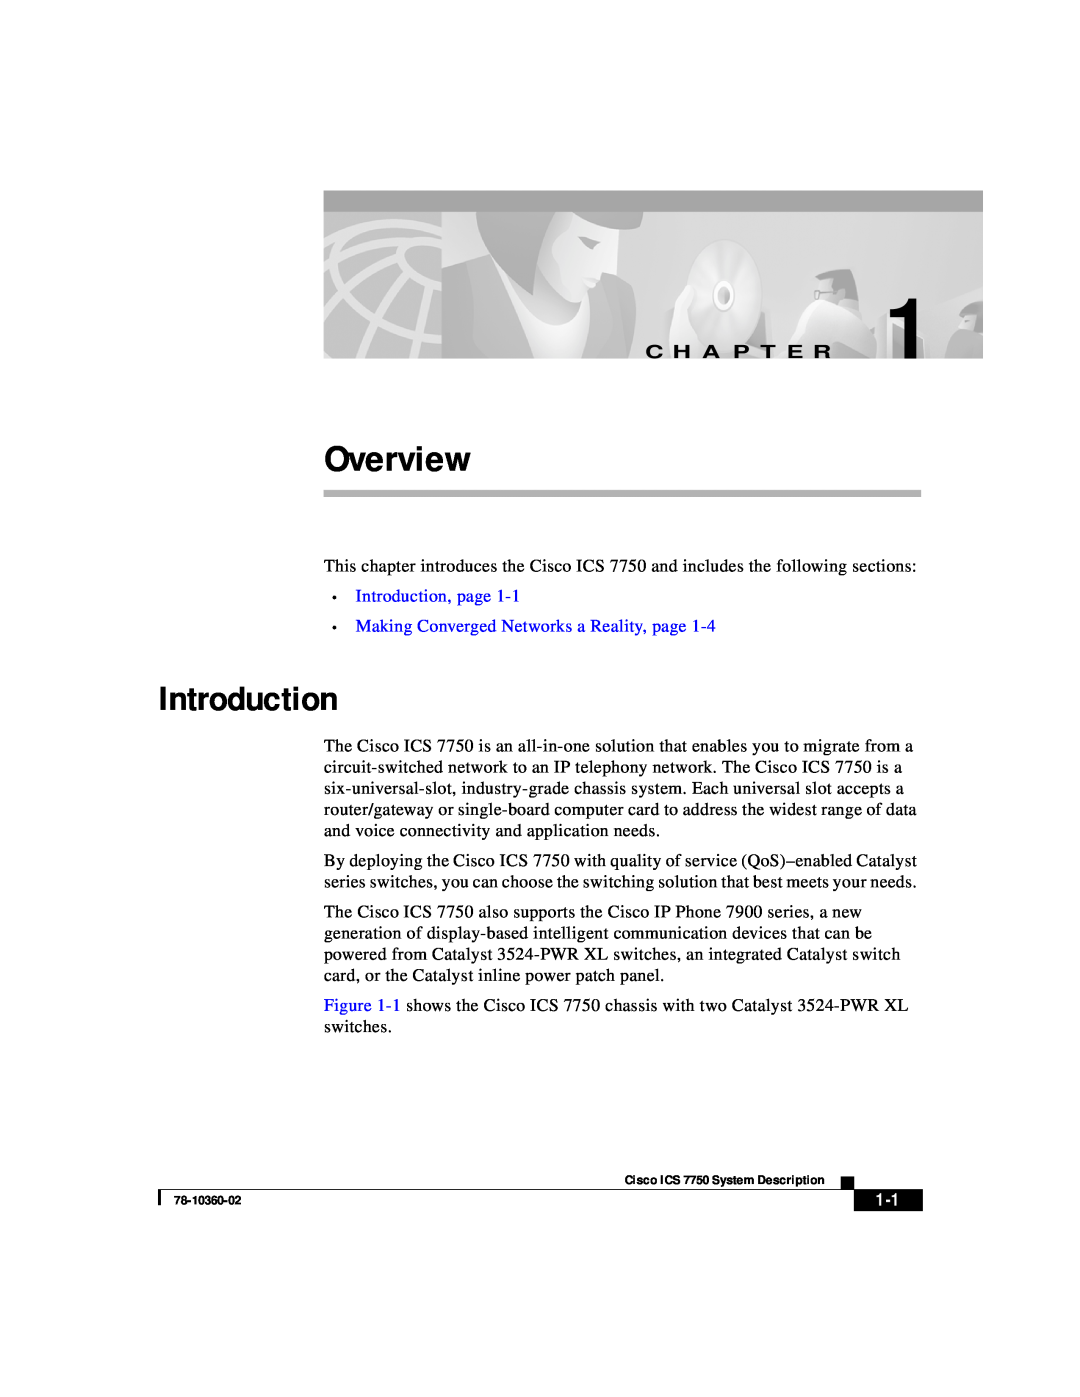 Cisco Systems ICS-7750 manual Overview, C H A P T E R, Introduction, page Making Converged Networks a Reality, page 